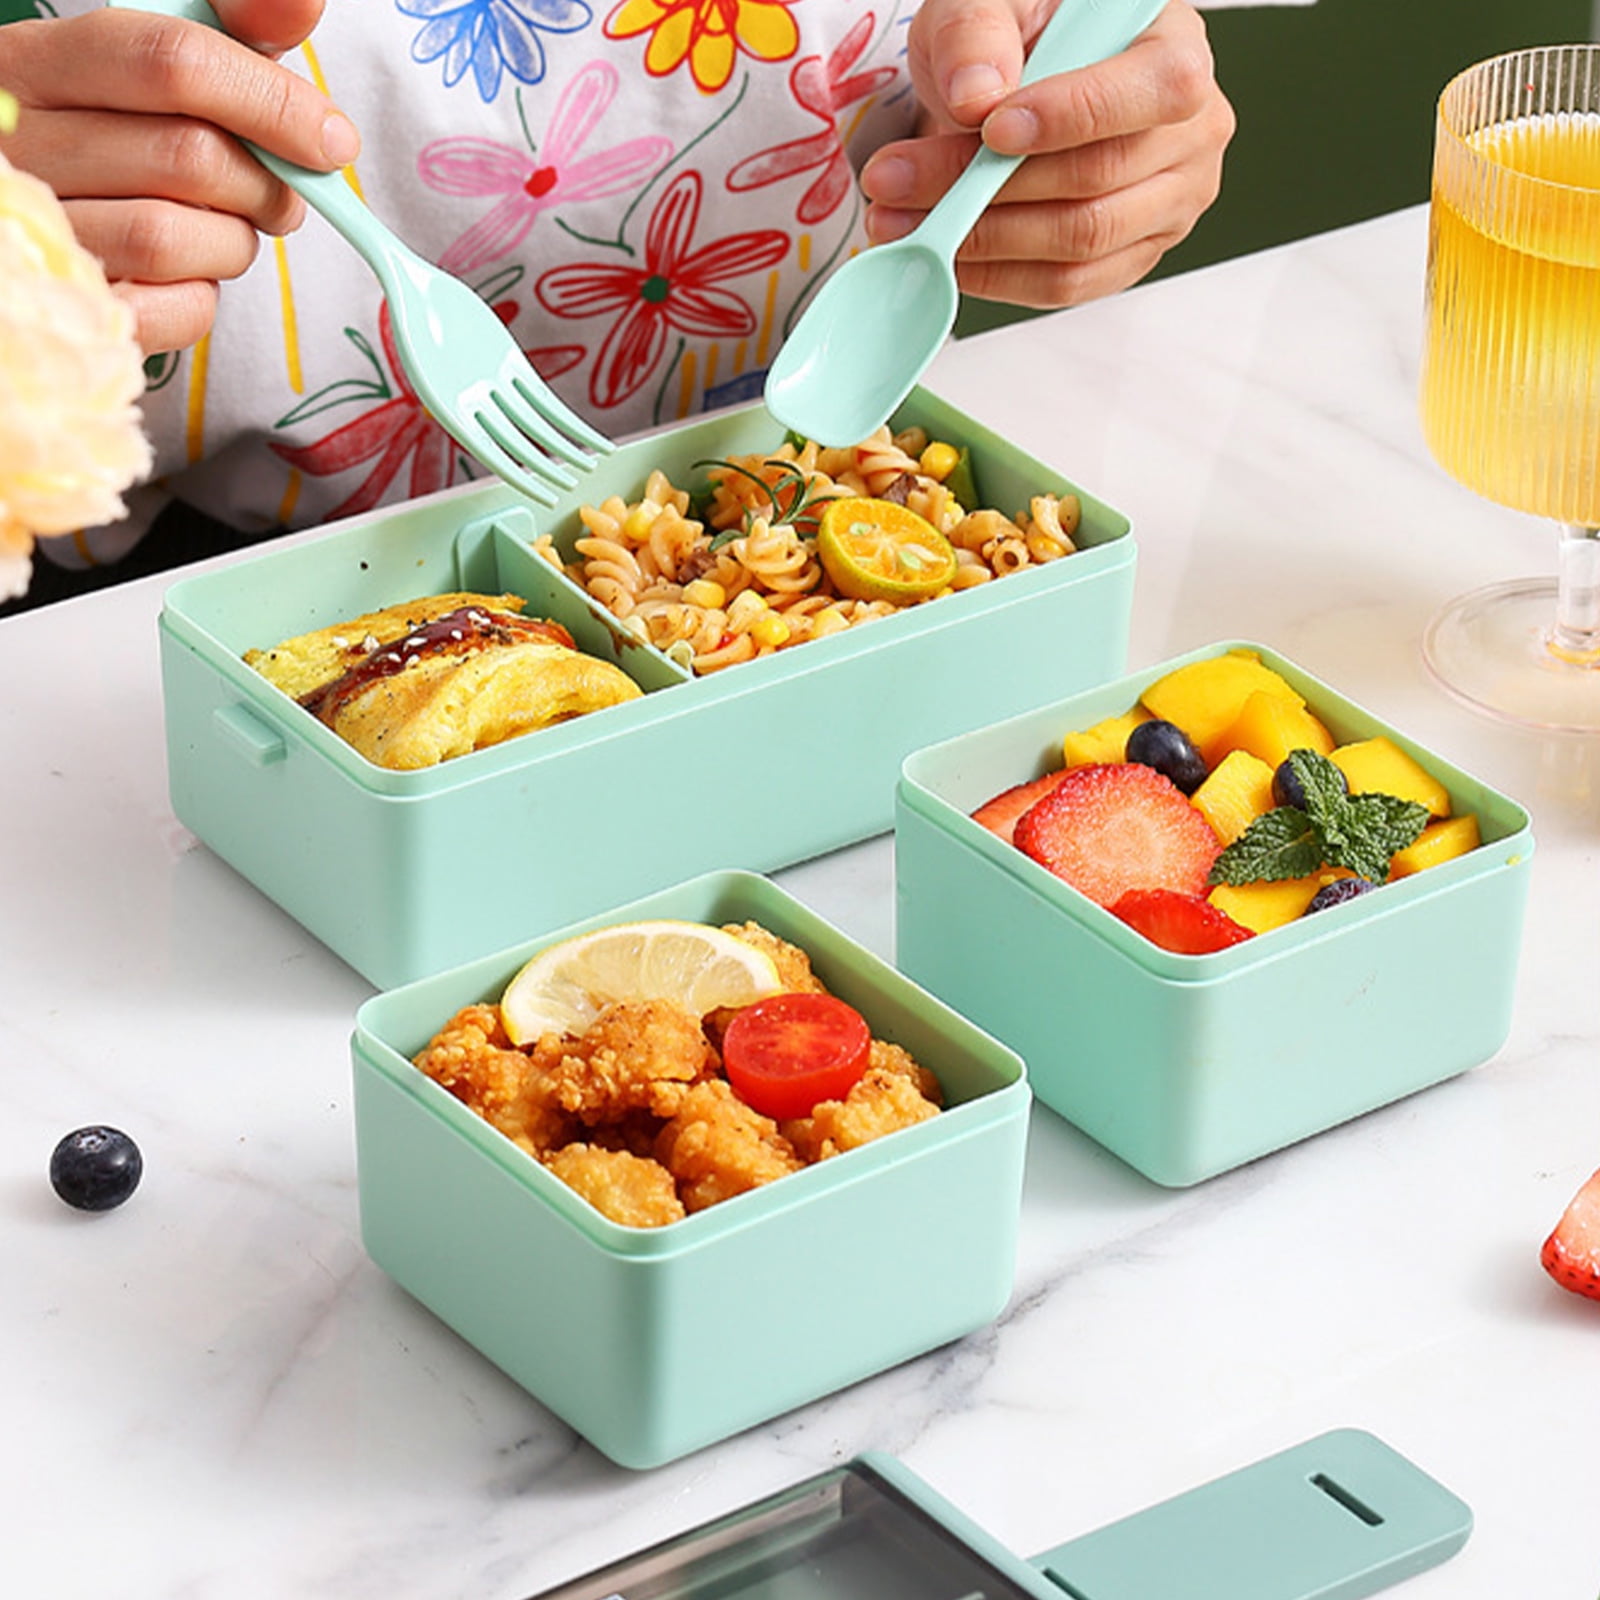 Homnoble Bento Box Adult Lunch Box, Bento Box for Kids Leakproof BPA-Free 3  Compartment Lunch Box Co…See more Homnoble Bento Box Adult Lunch Box